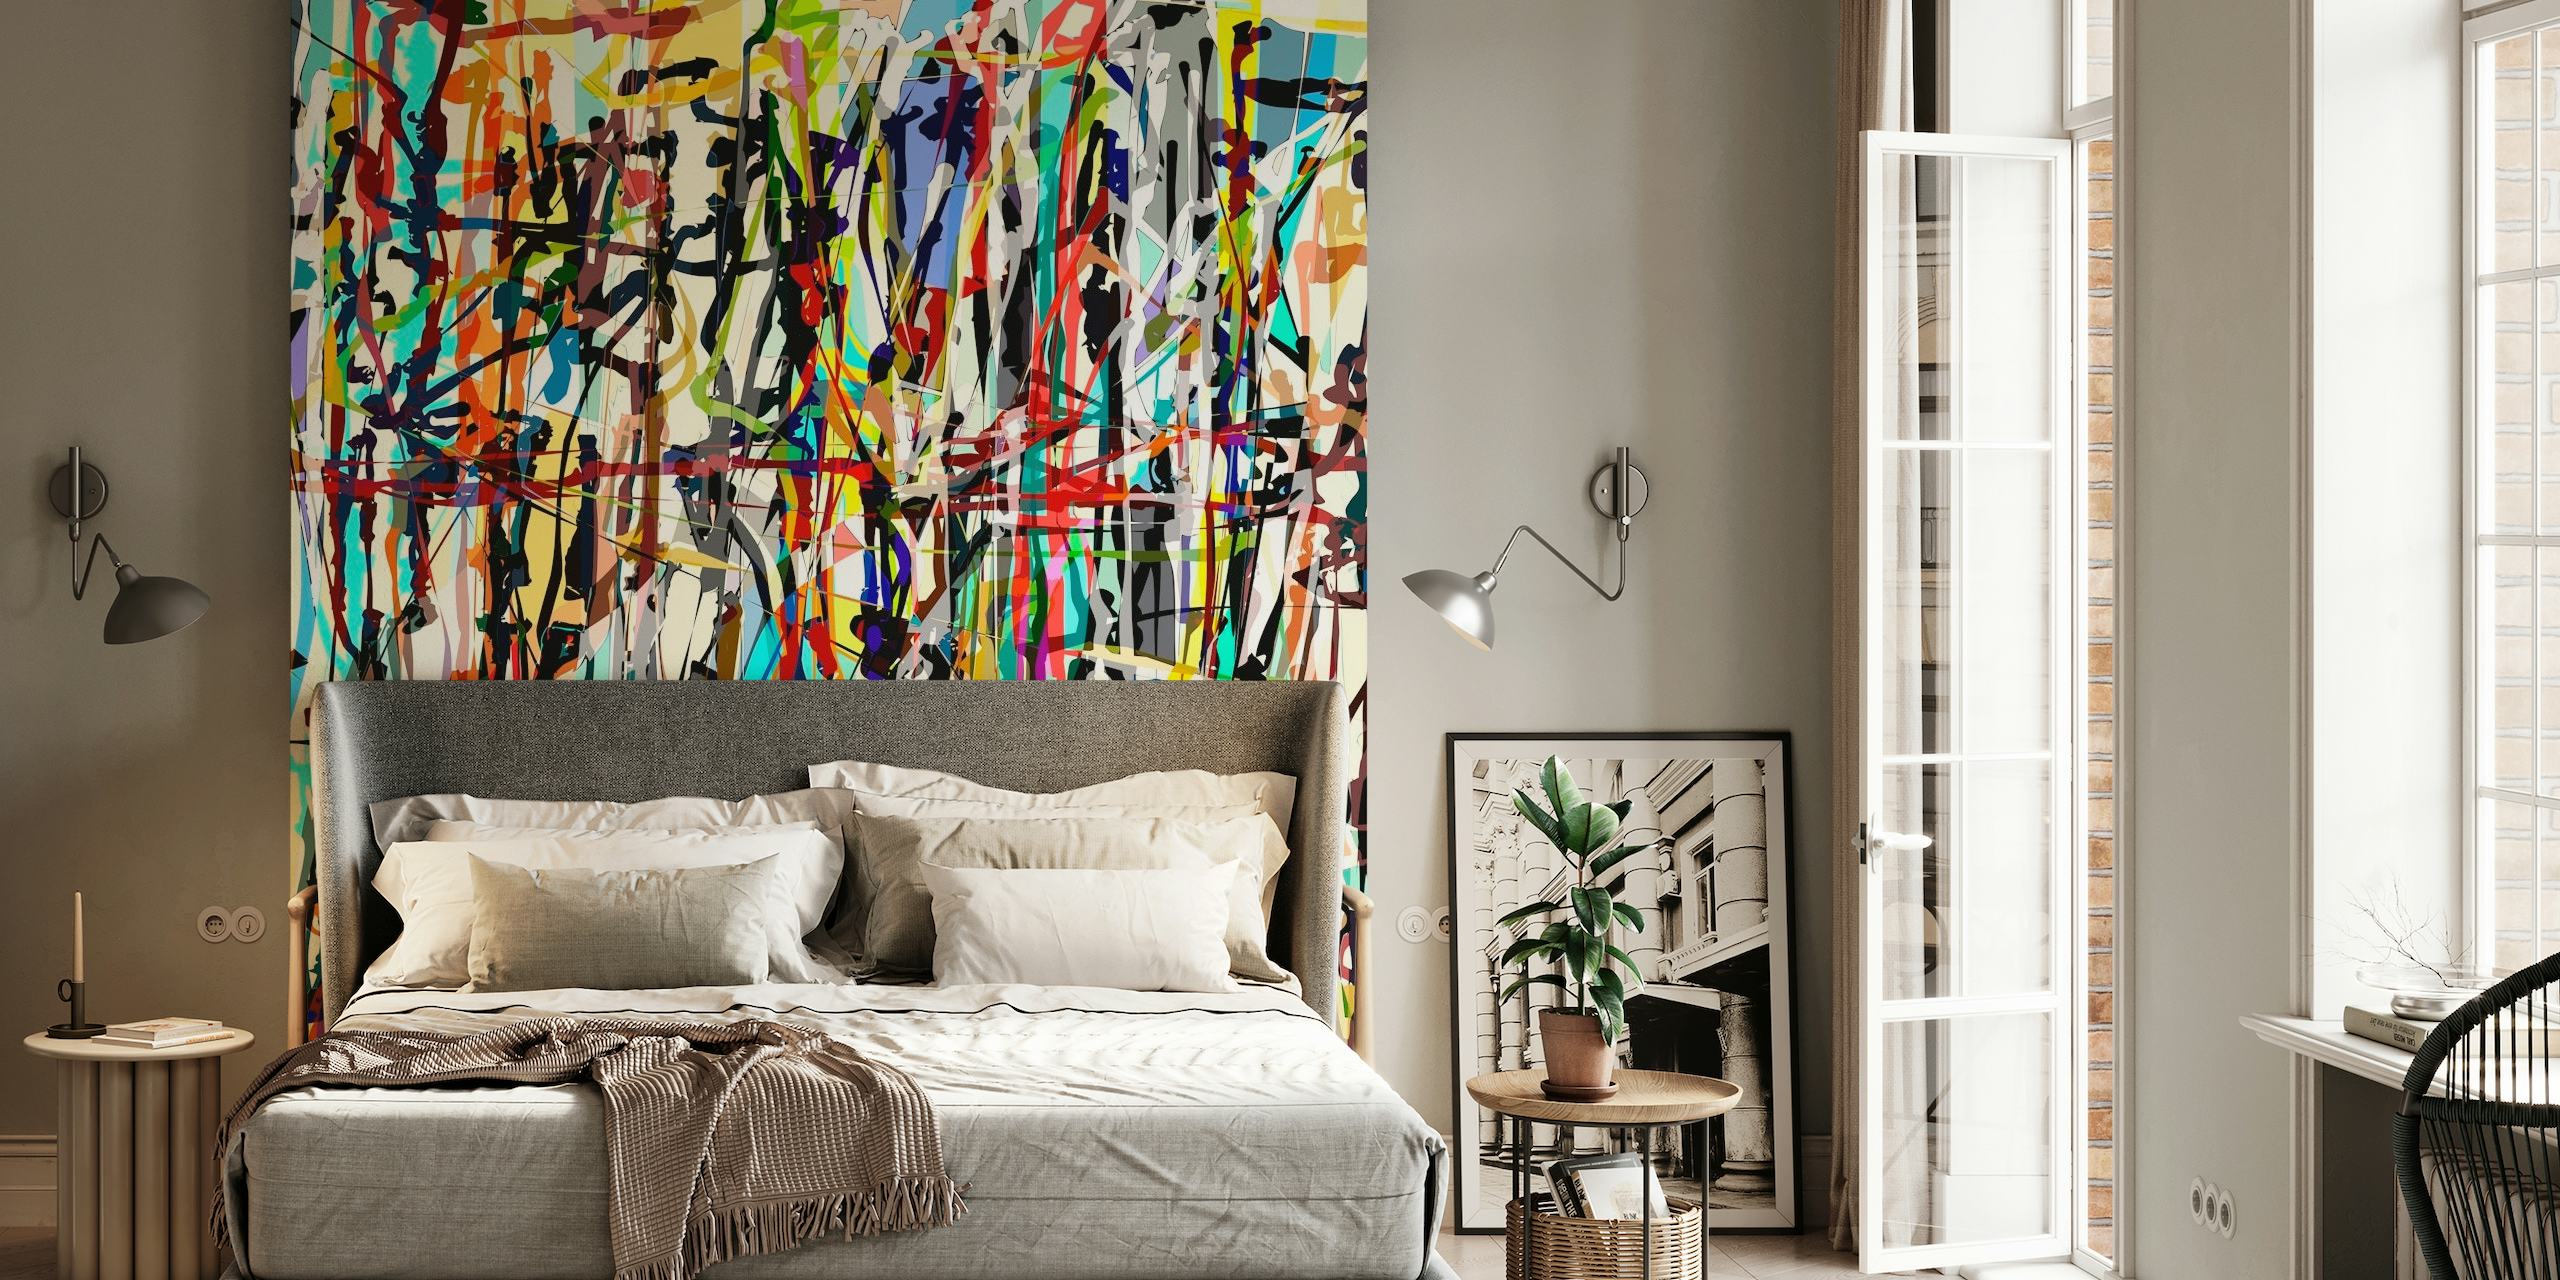 Abstract Pollock-inspired wall mural with a colorful mix of vibrant splatters and brush strokes.